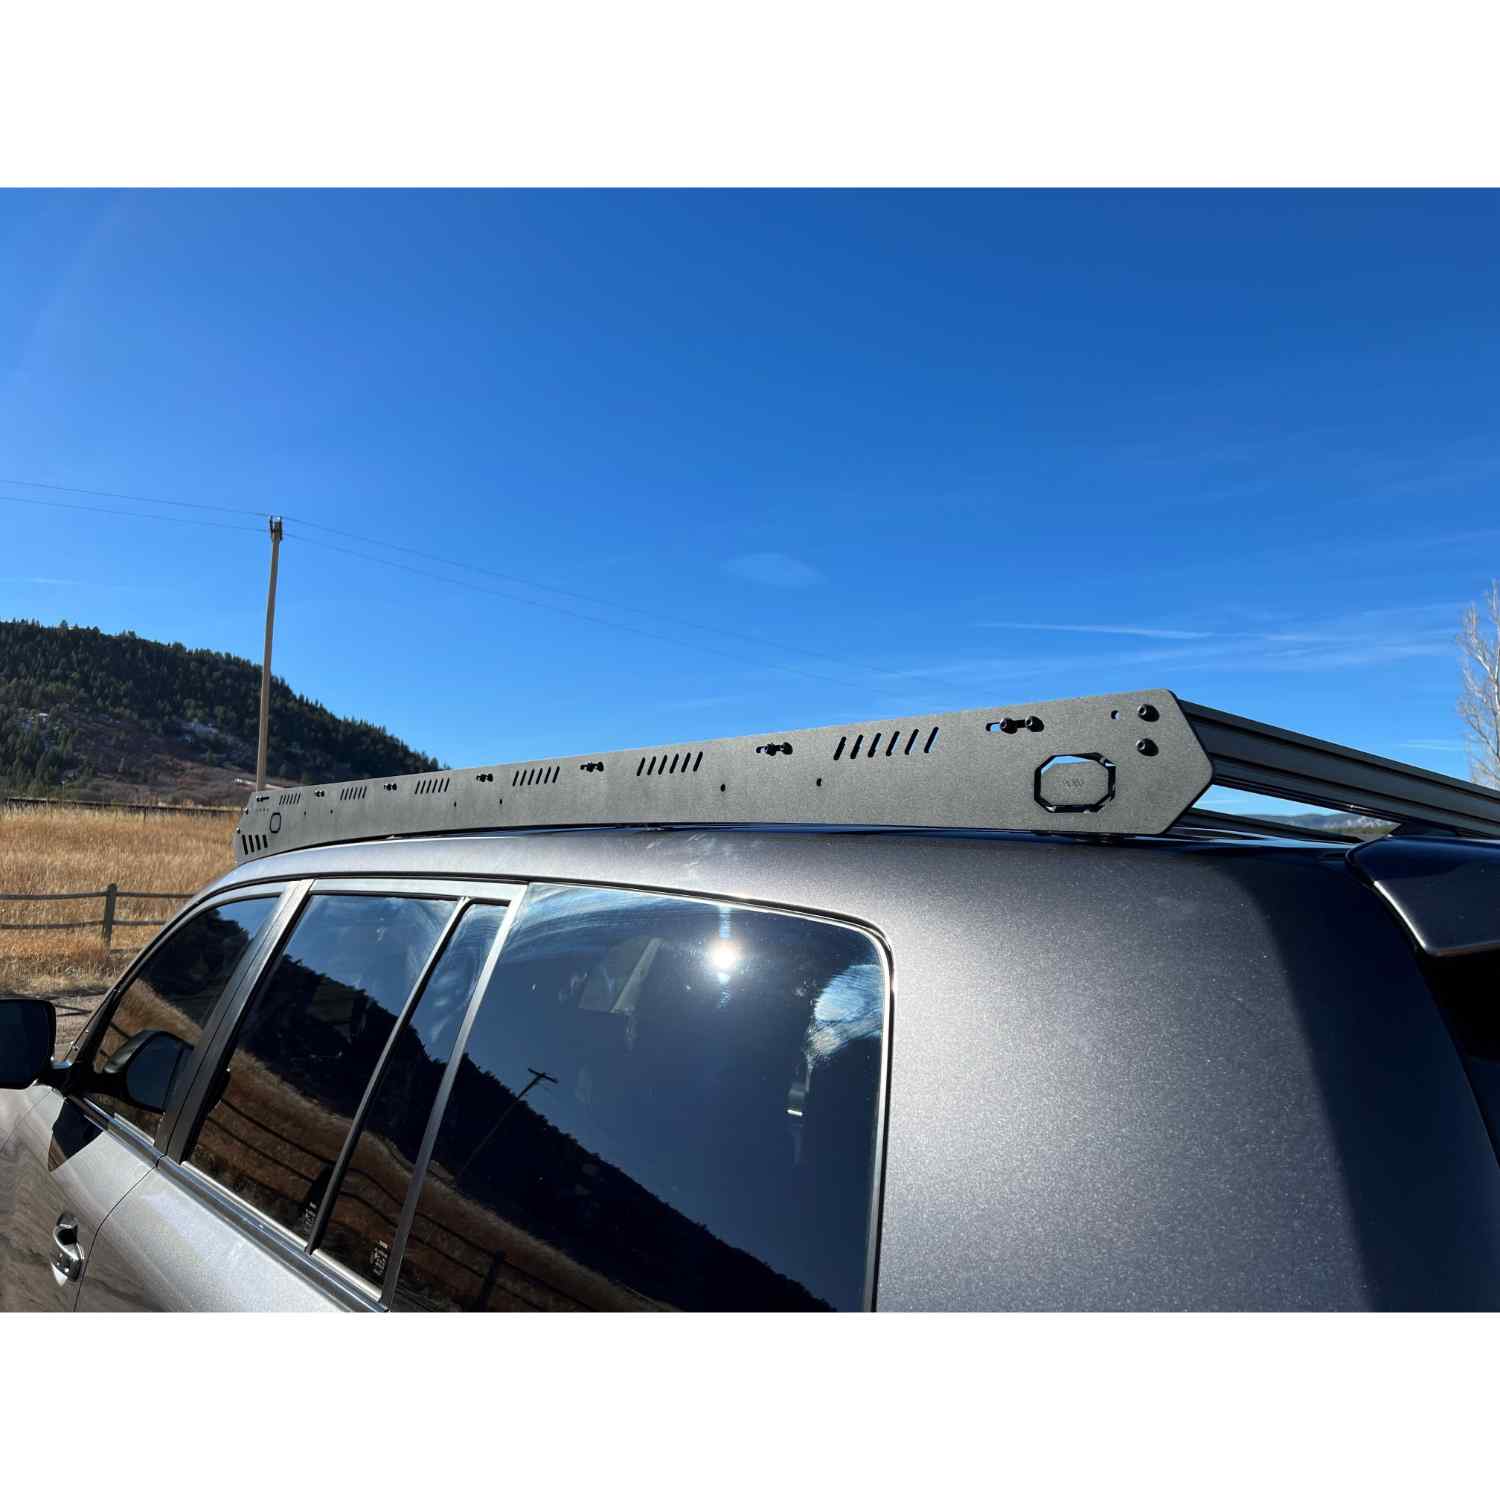 Uptop Overland Bravo 2007-2021 Toyota Land Cruiser 200 7th Generation Roof Rack Side Closed View